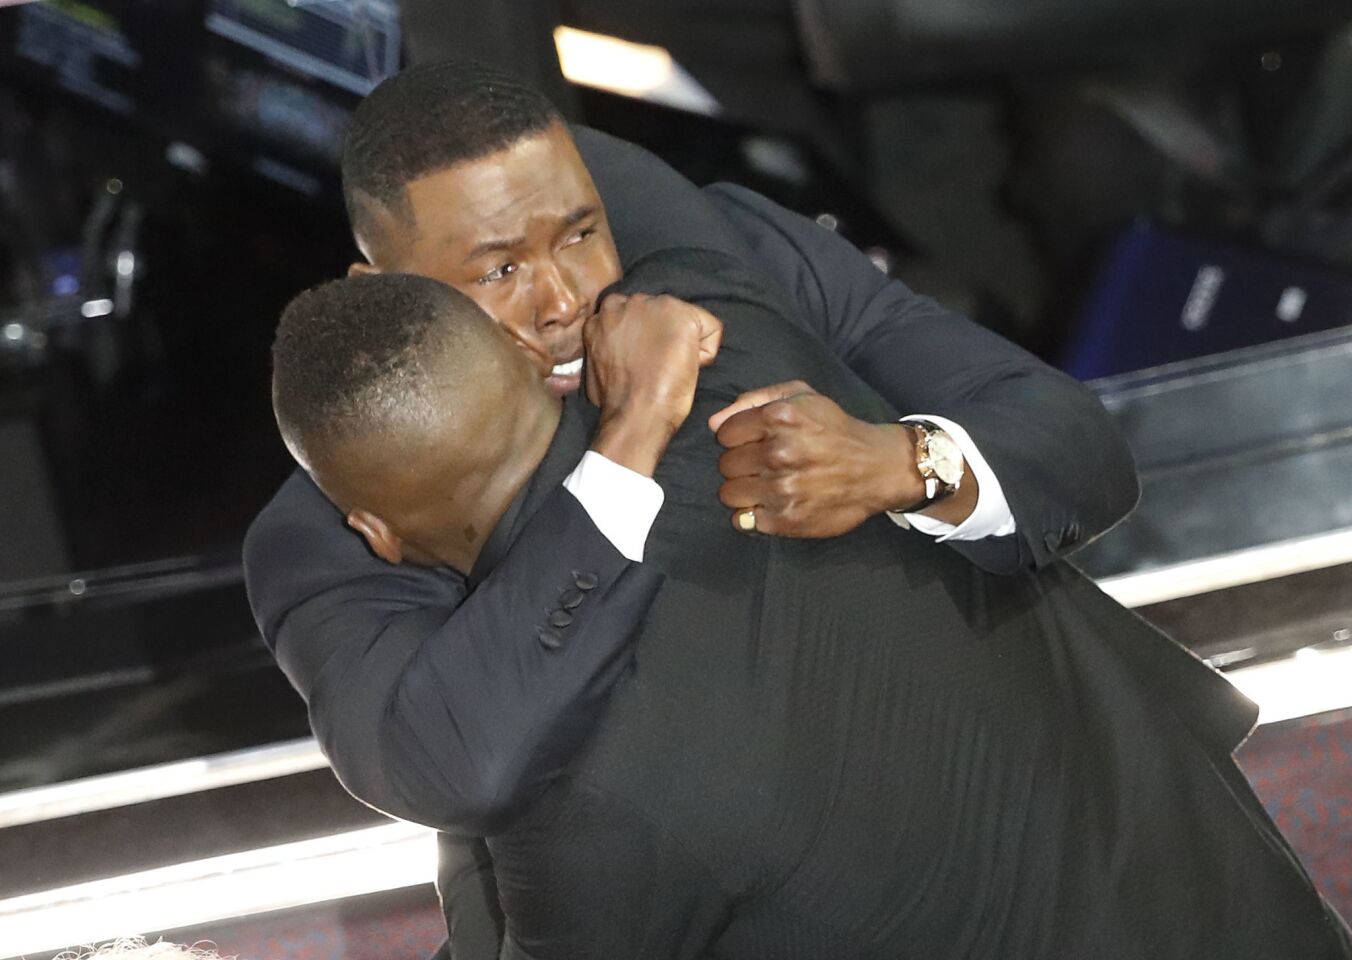 Trevante Rhodes hugs Mahershala Ali after "Moonlight" was correctly identified as the winner of best picture.